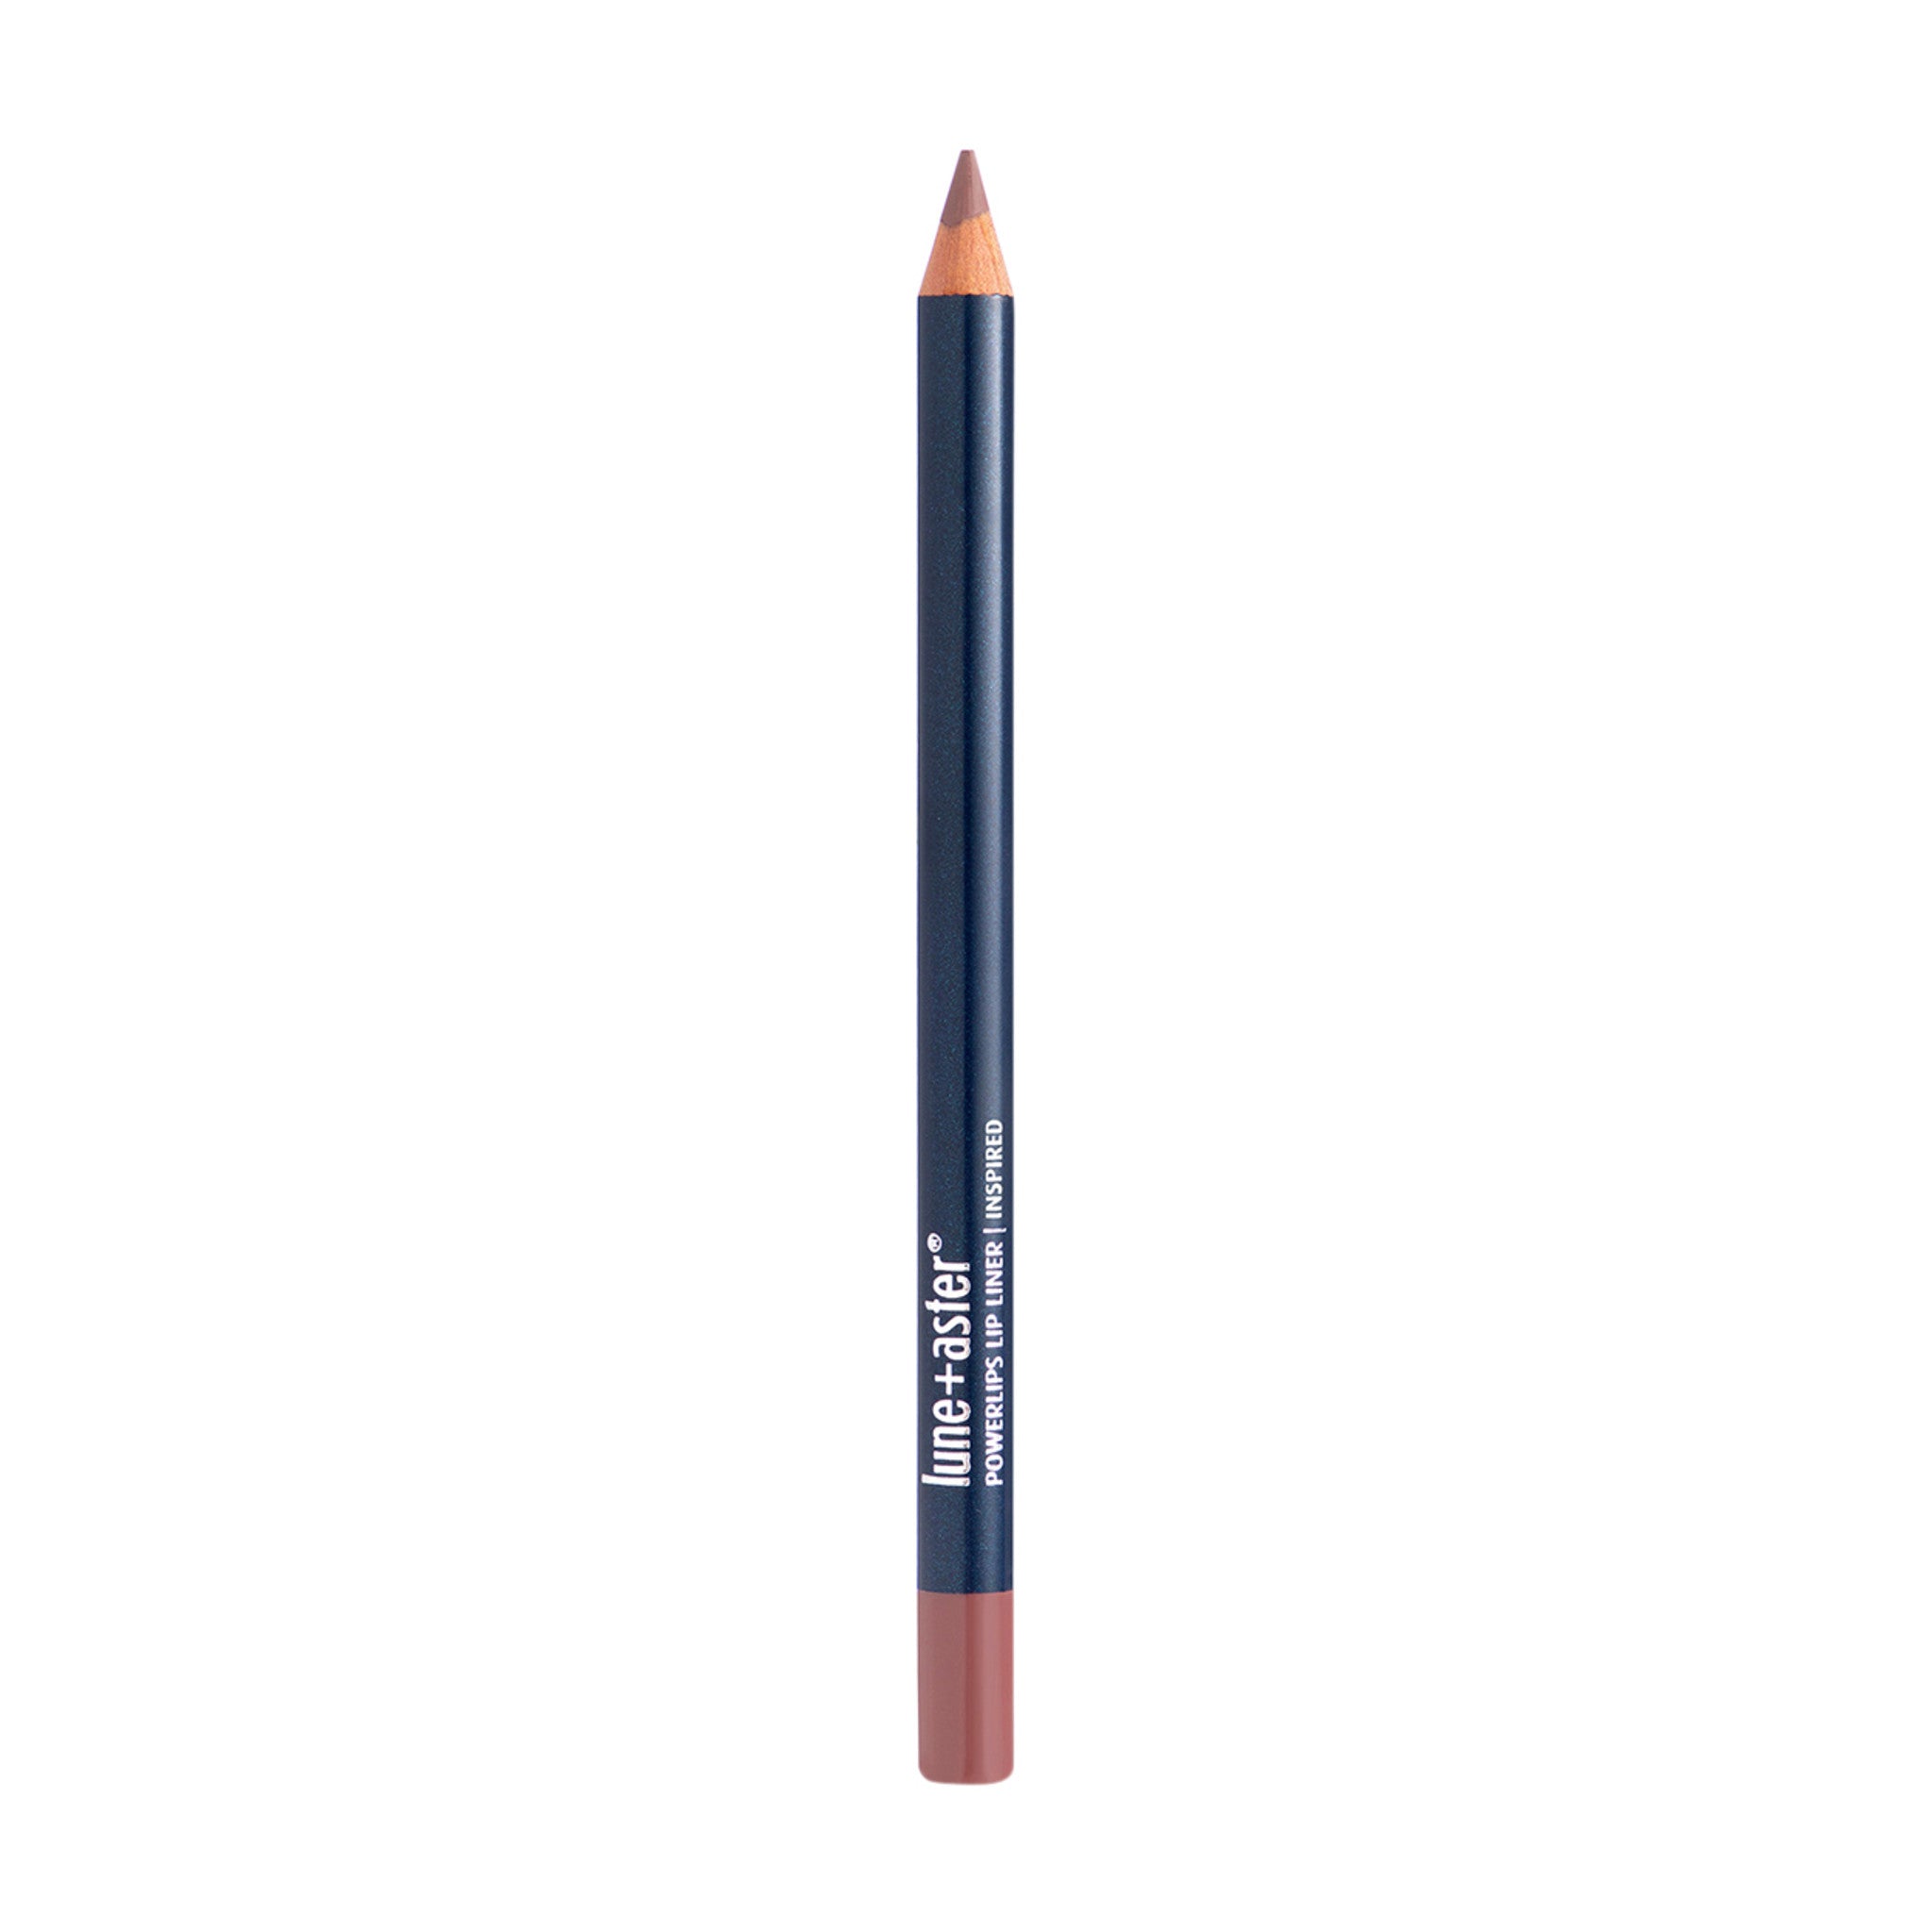 Lune+Aster PowerLips Lip Liner Color/Shade variant: Inspired main image. This product is in the color nude